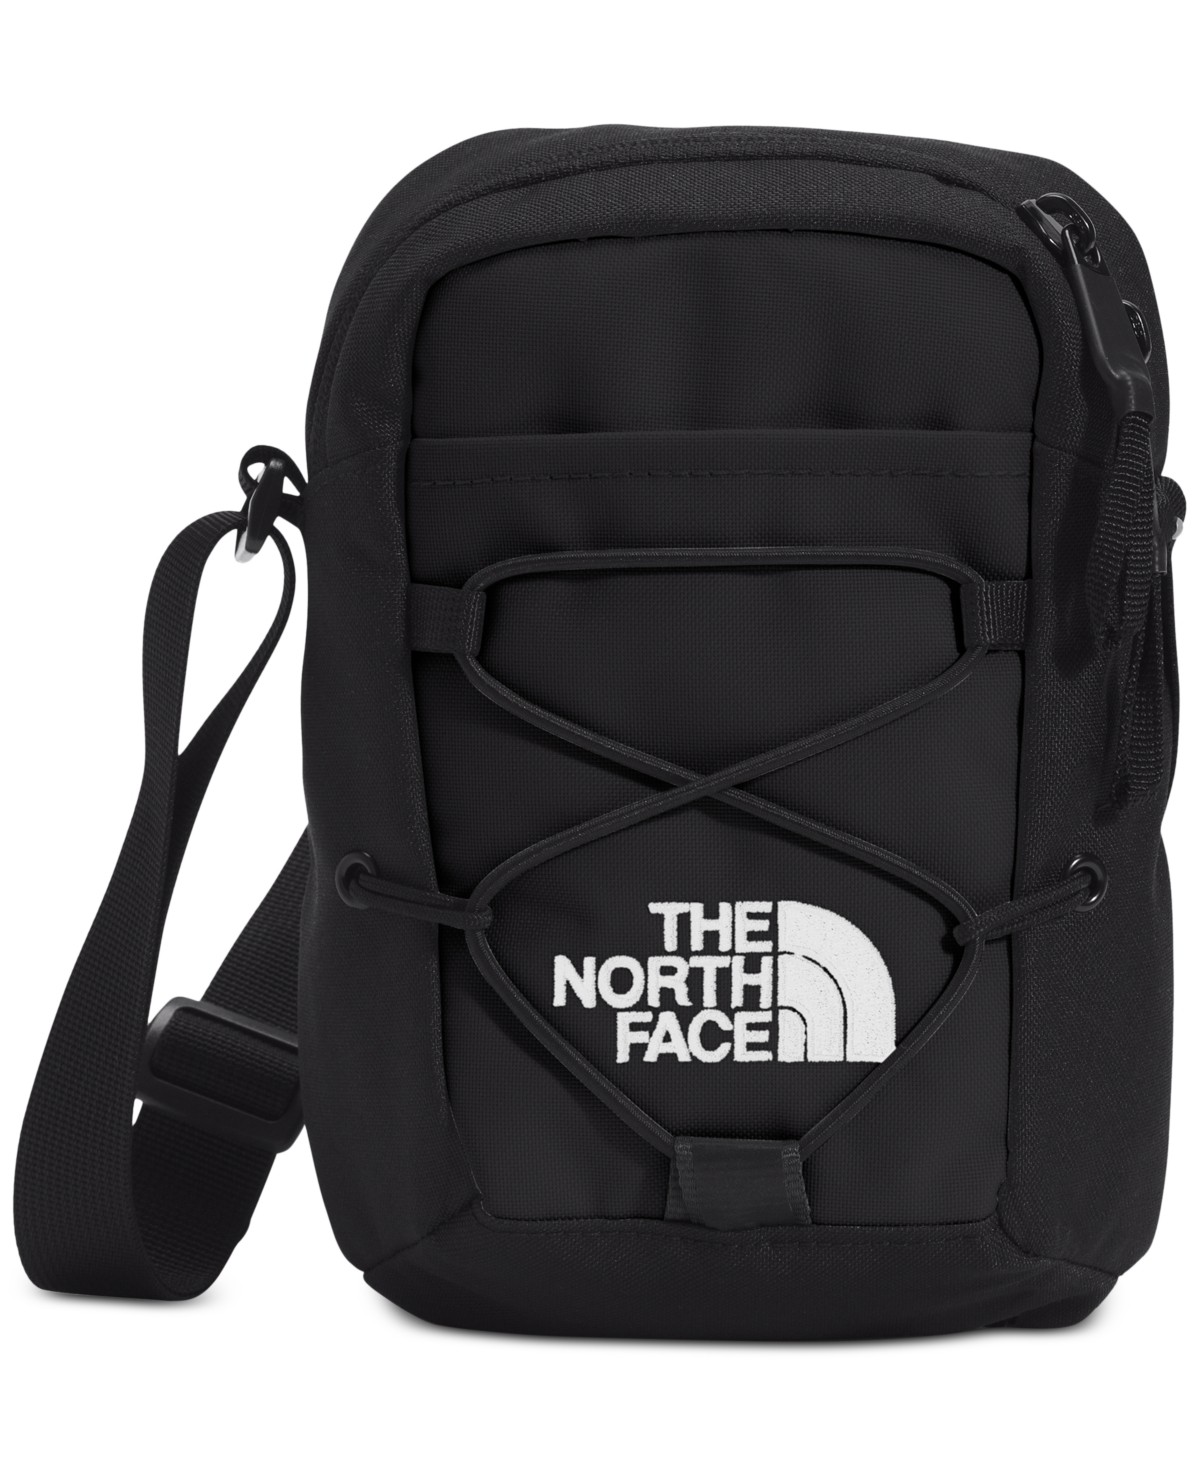 The North Face Jester Crossbody In Black